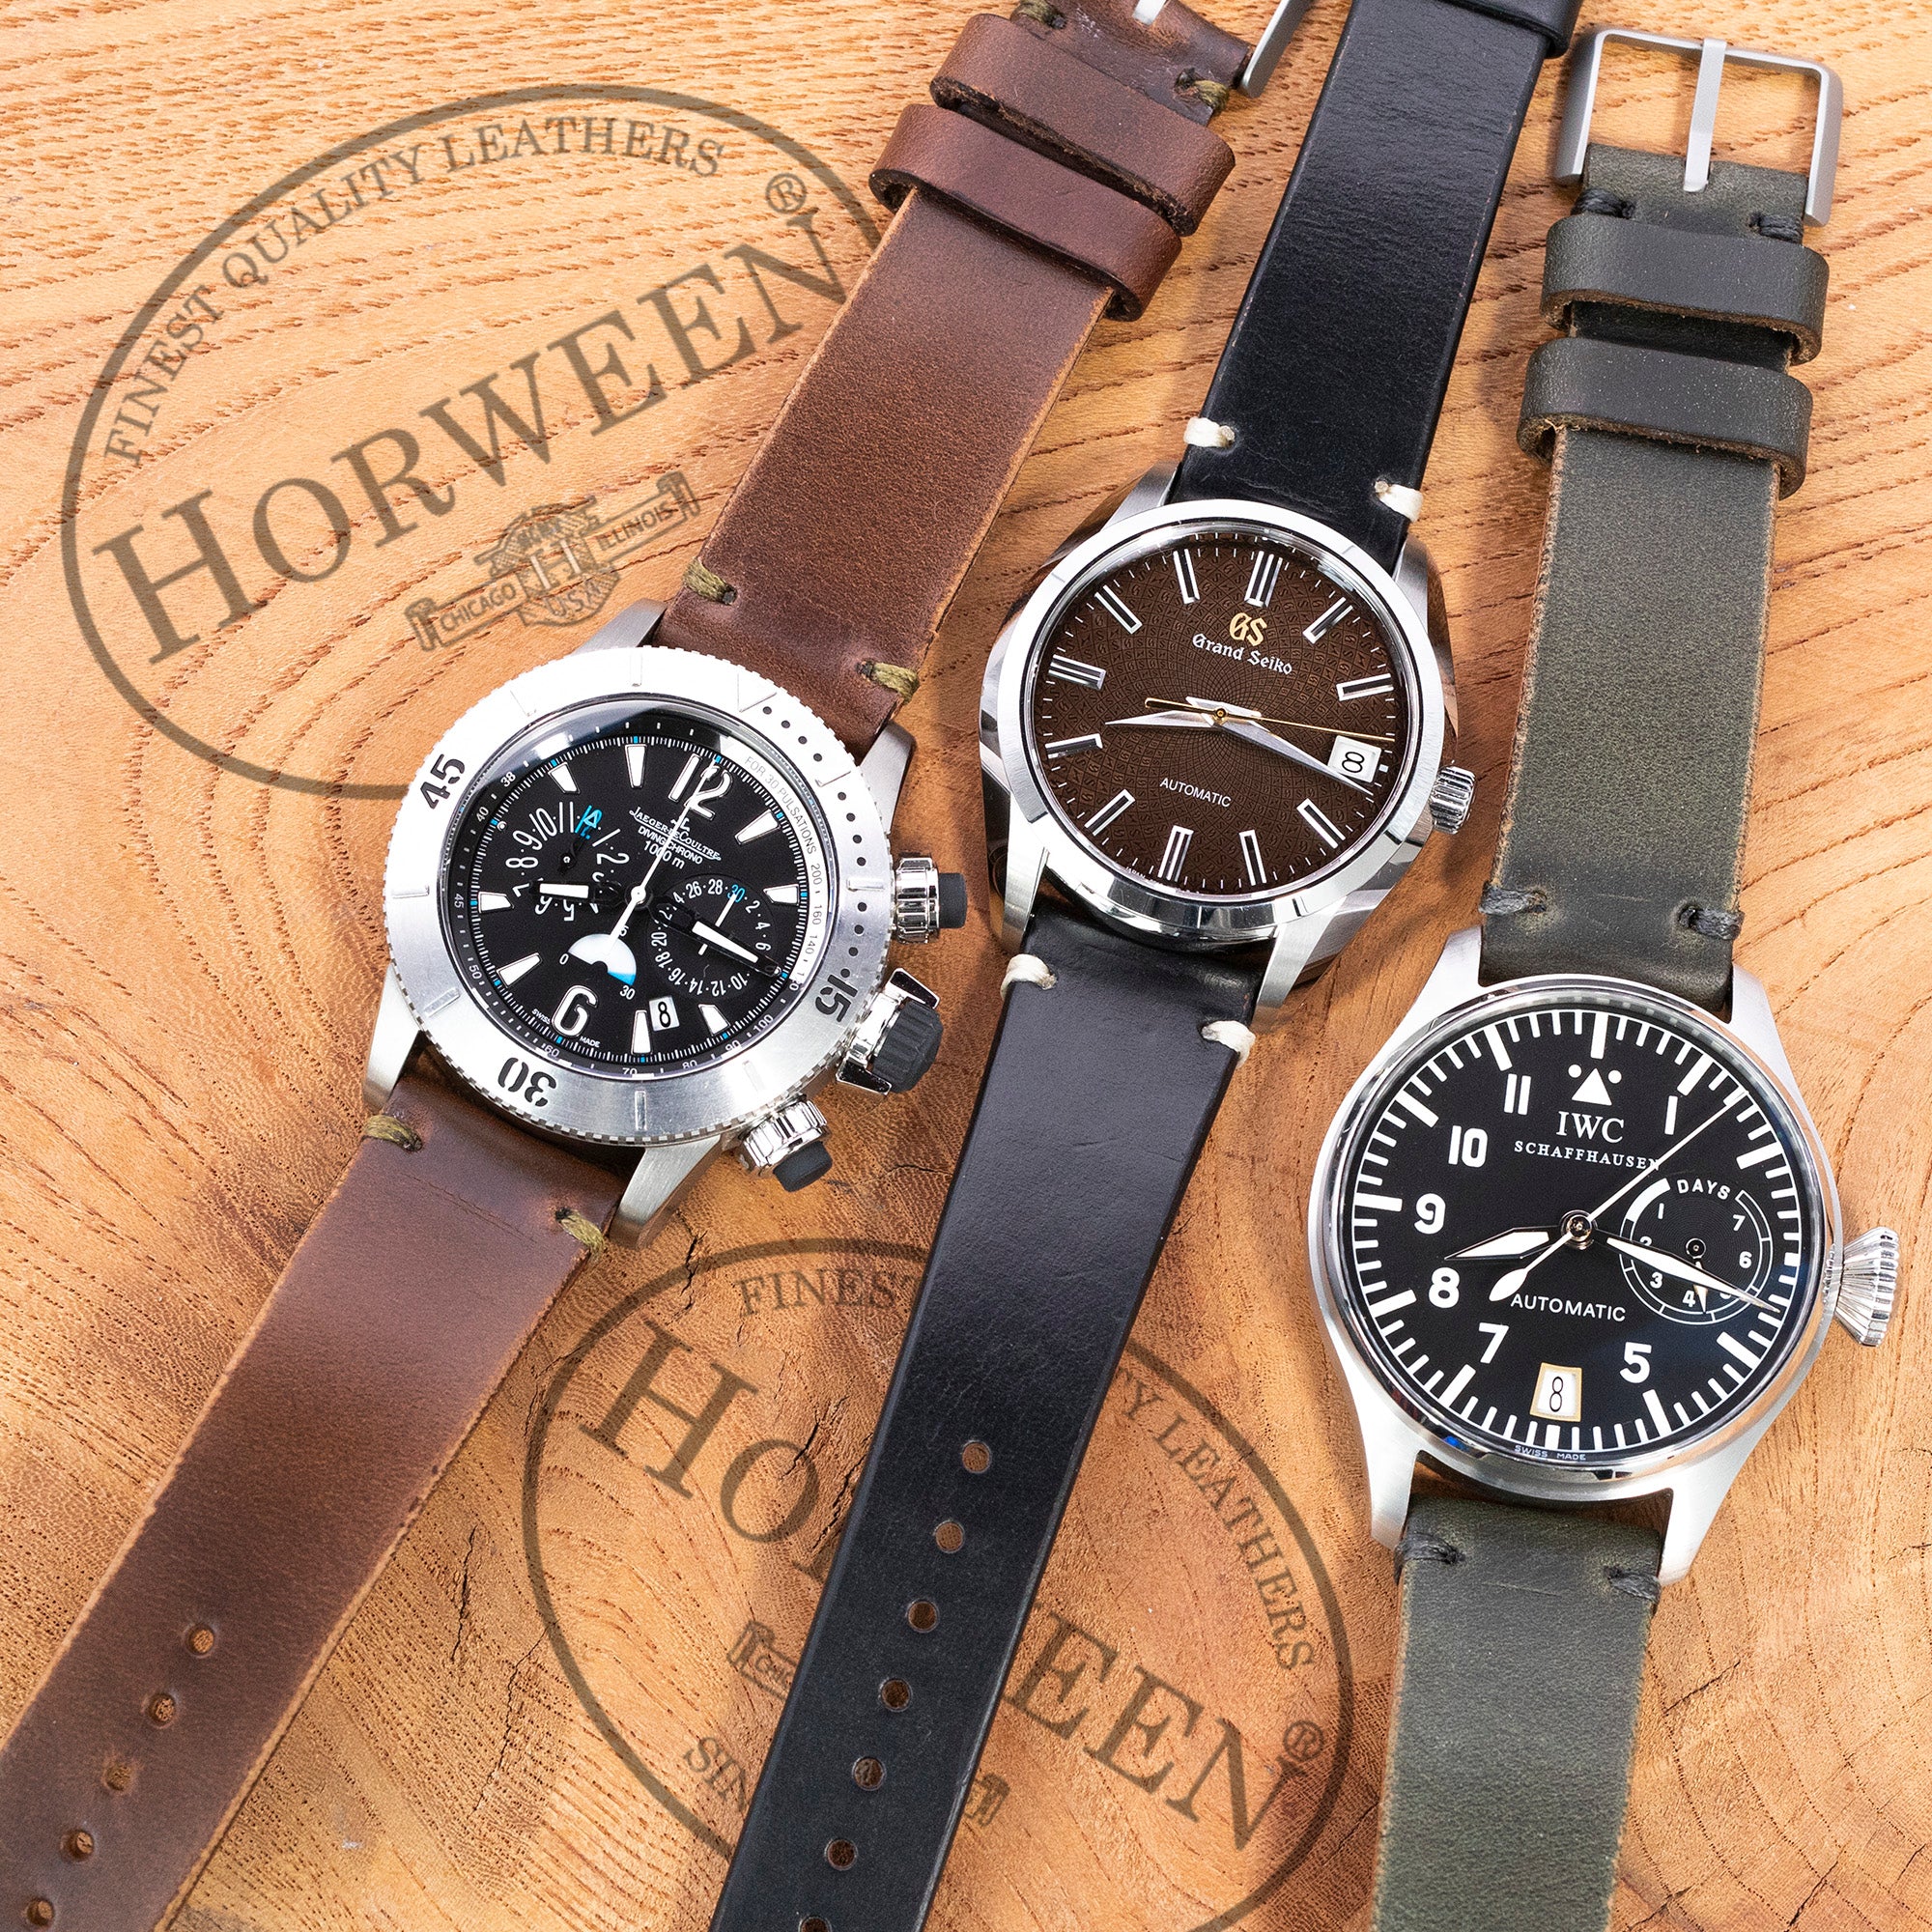 Horween Chromexcel or Shell Cordovan watch straps